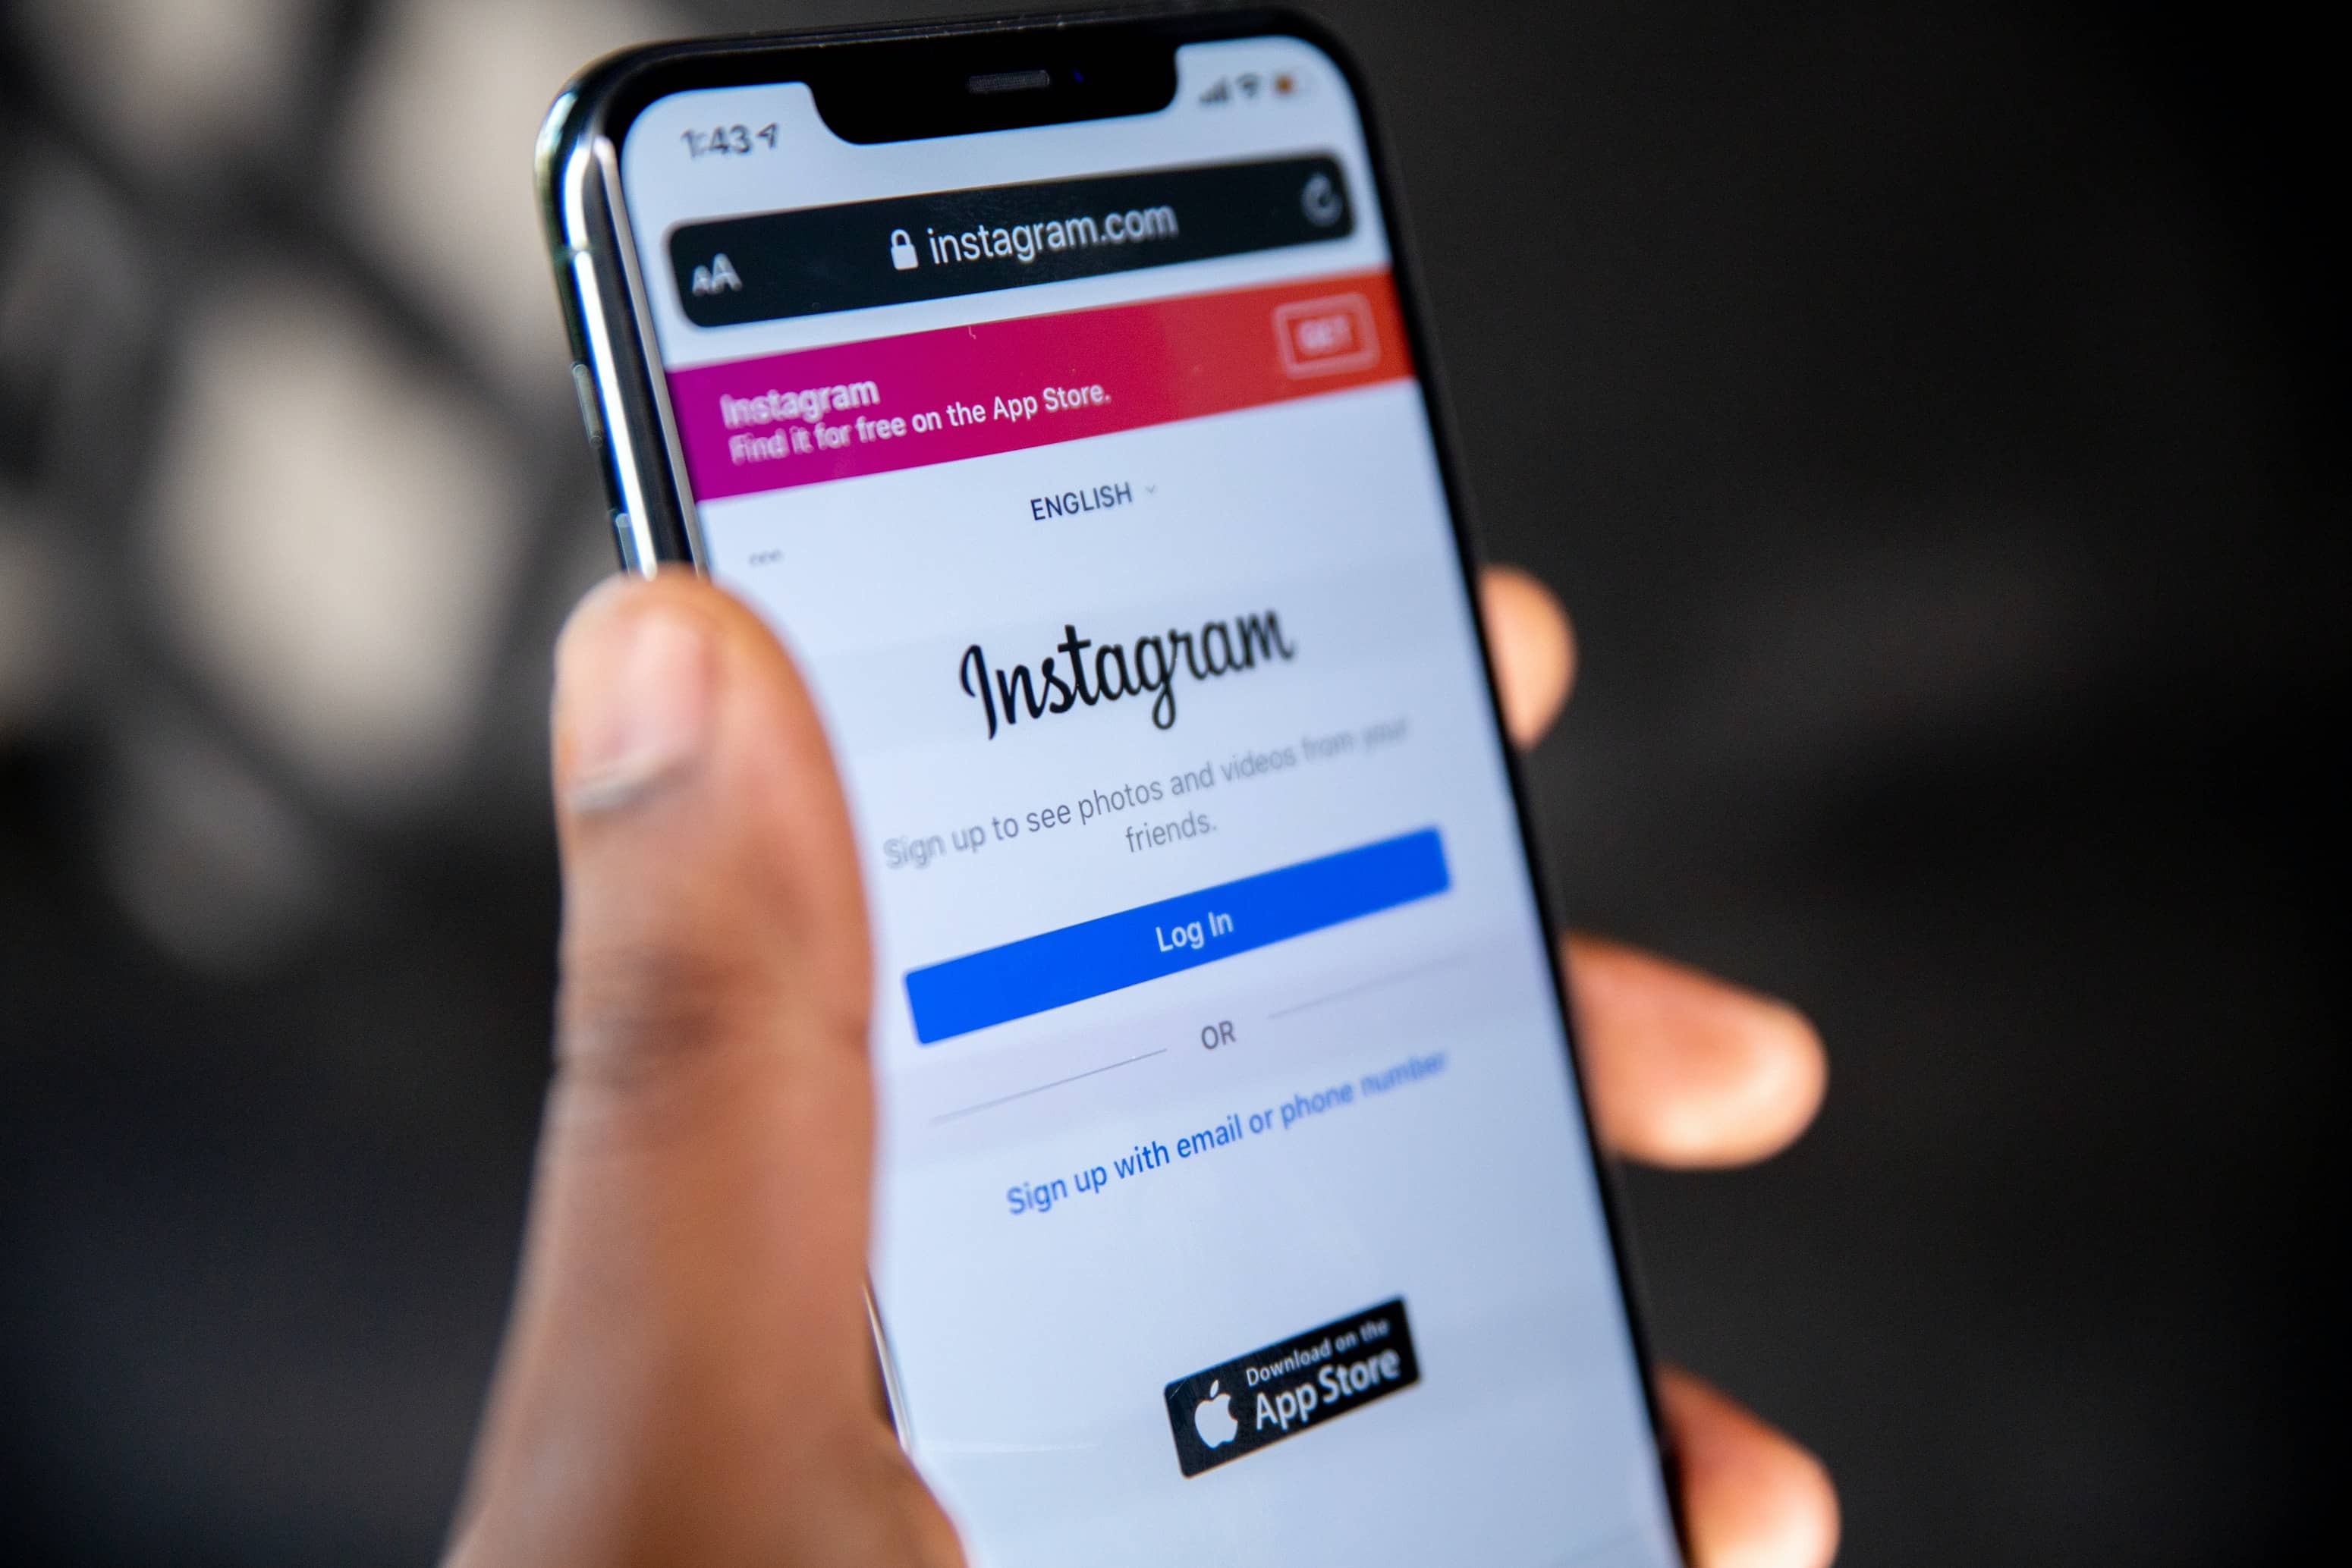 The phone shows Instagram login page